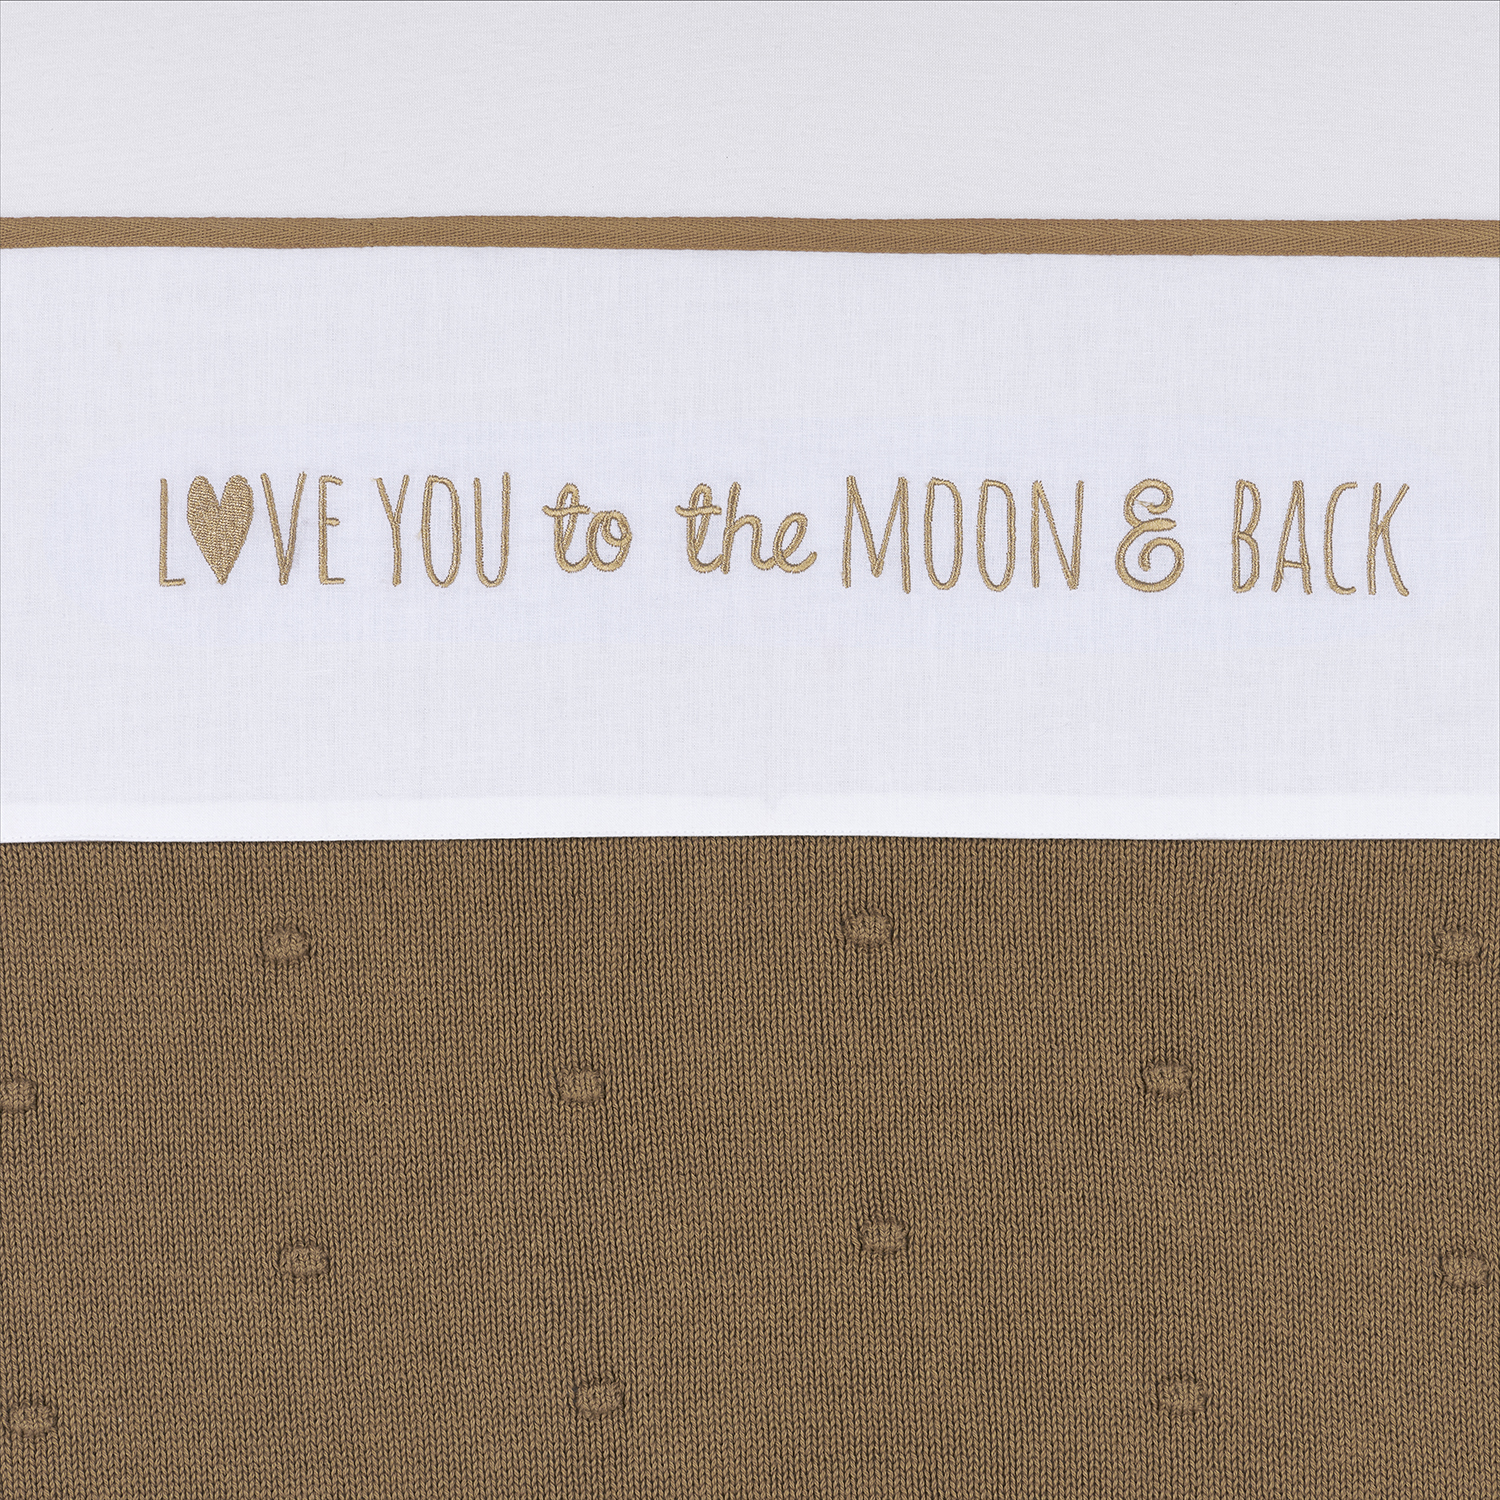 Wieglaken Love you to the moon & back - toffee - 75x100cm